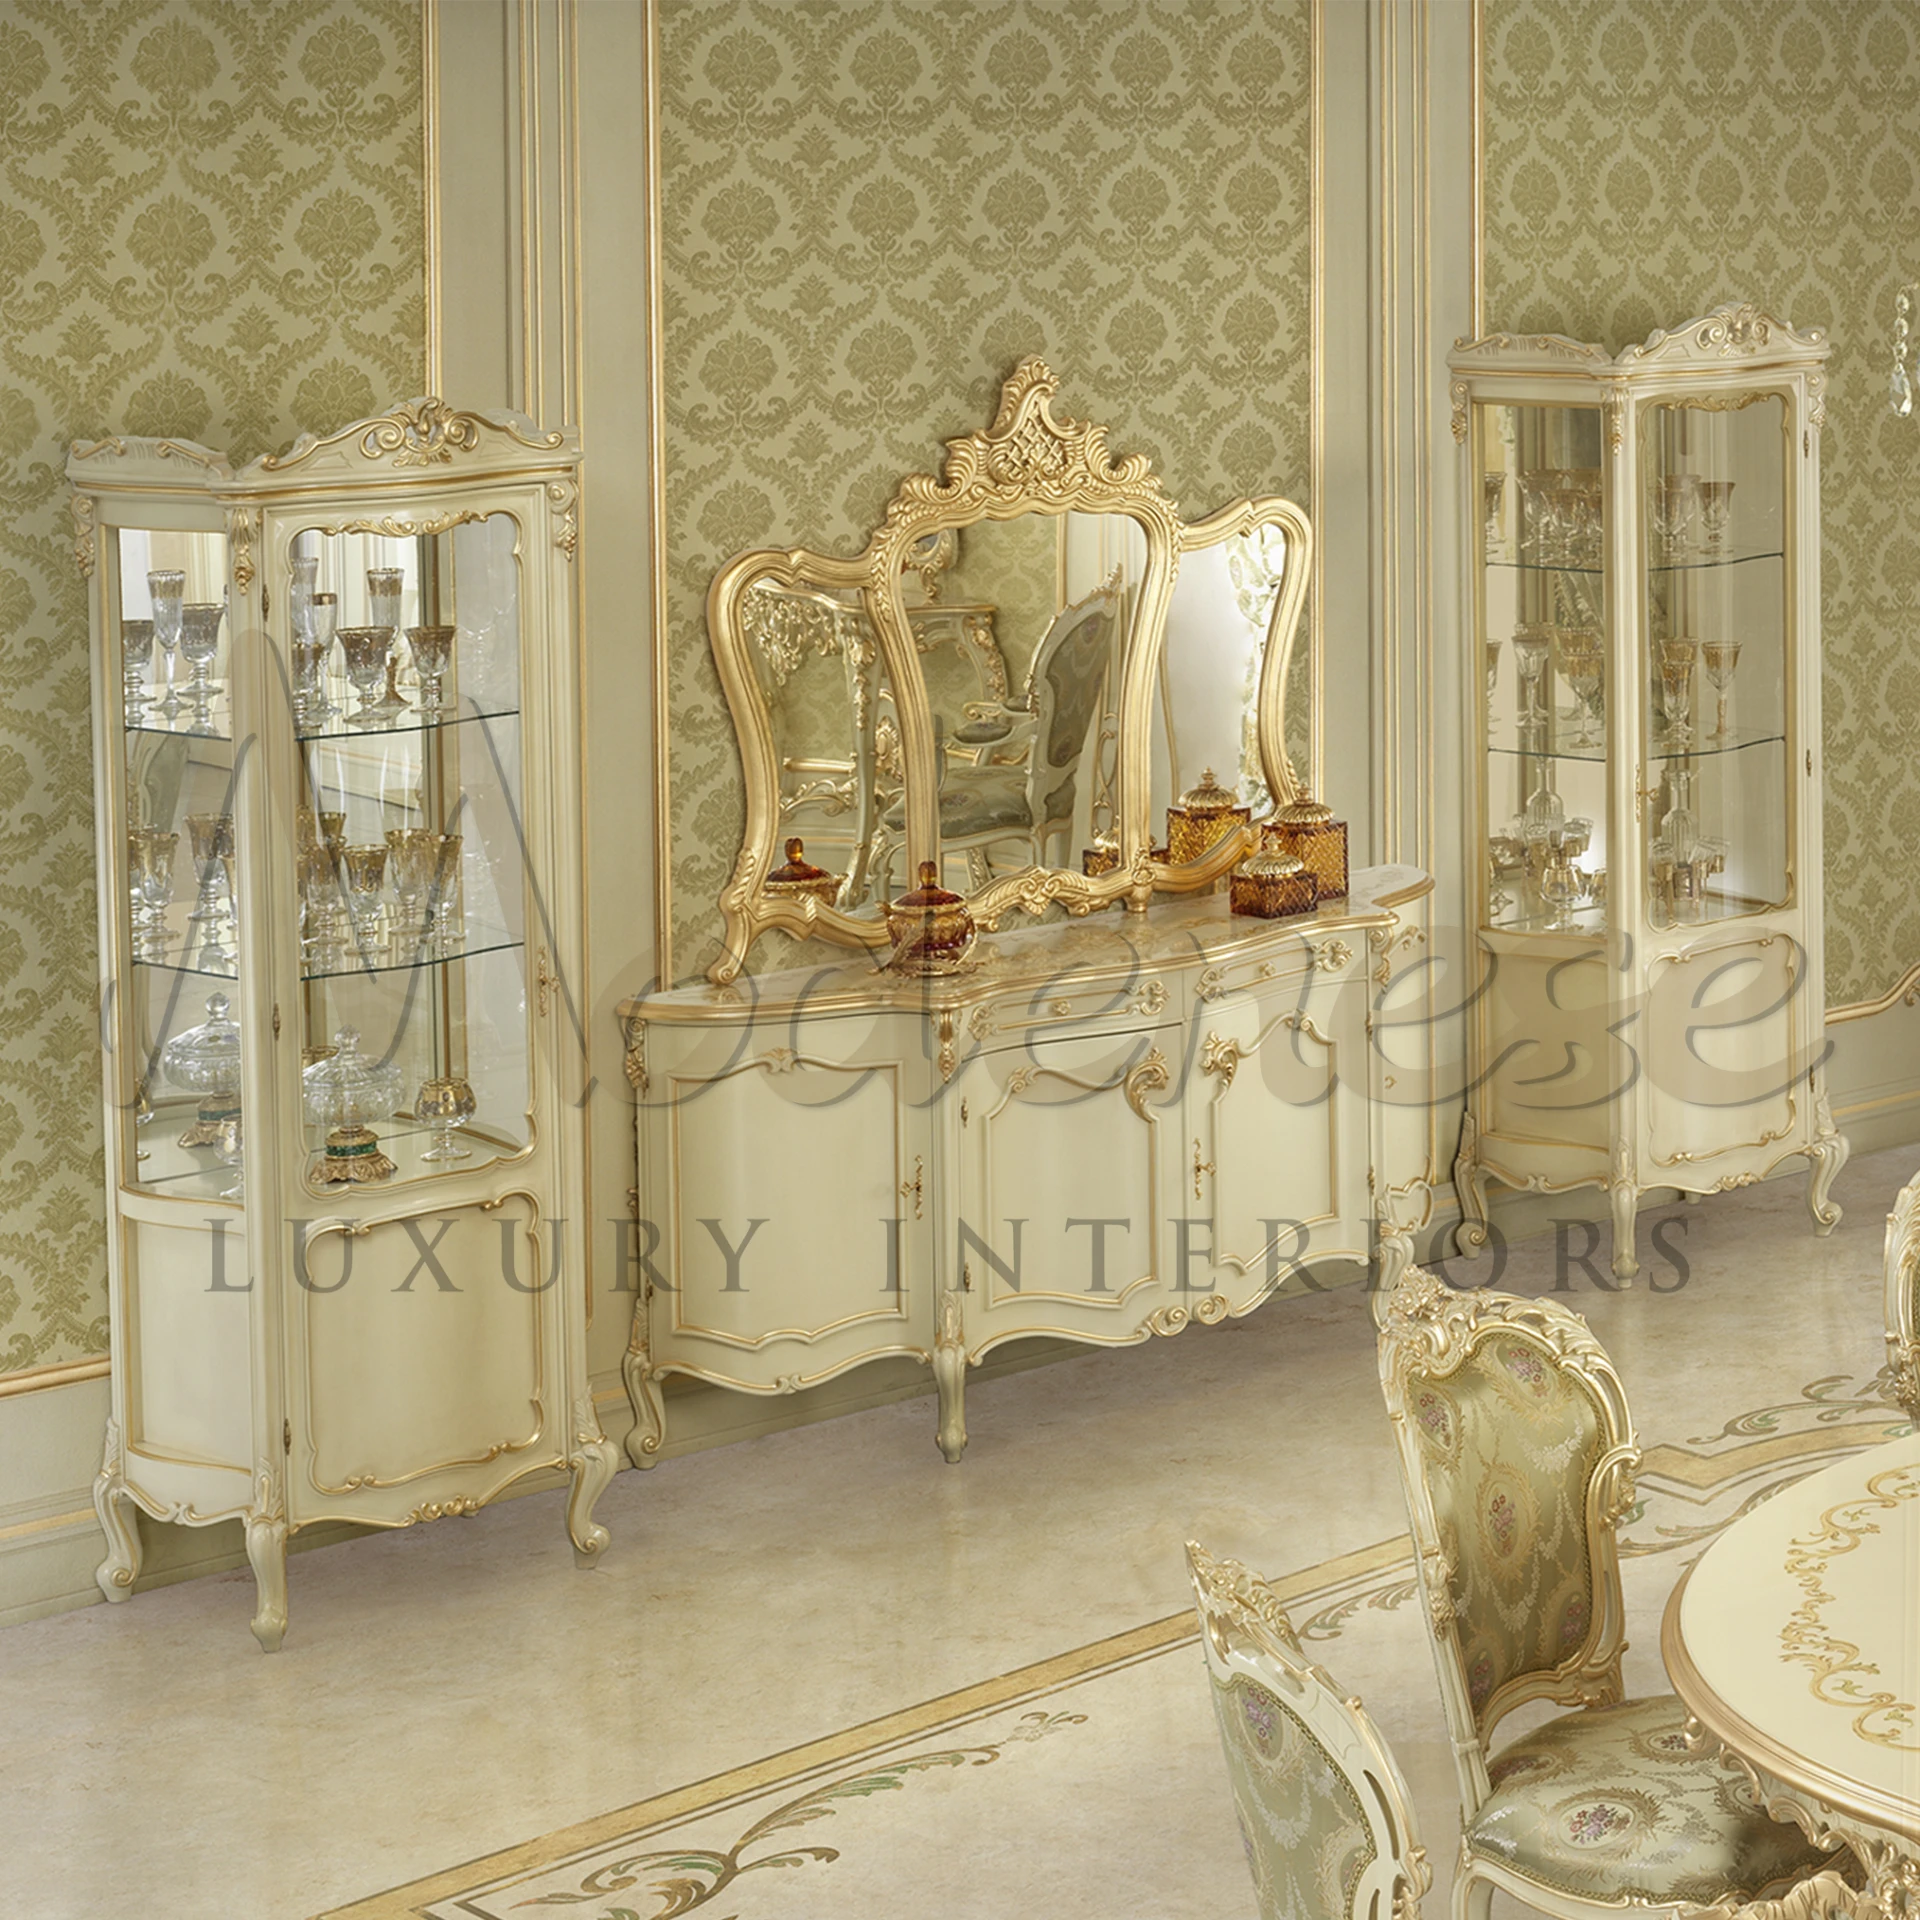 Luxury dressing room decorative mirror and two tall, glass-door cabinets filled with glassware.